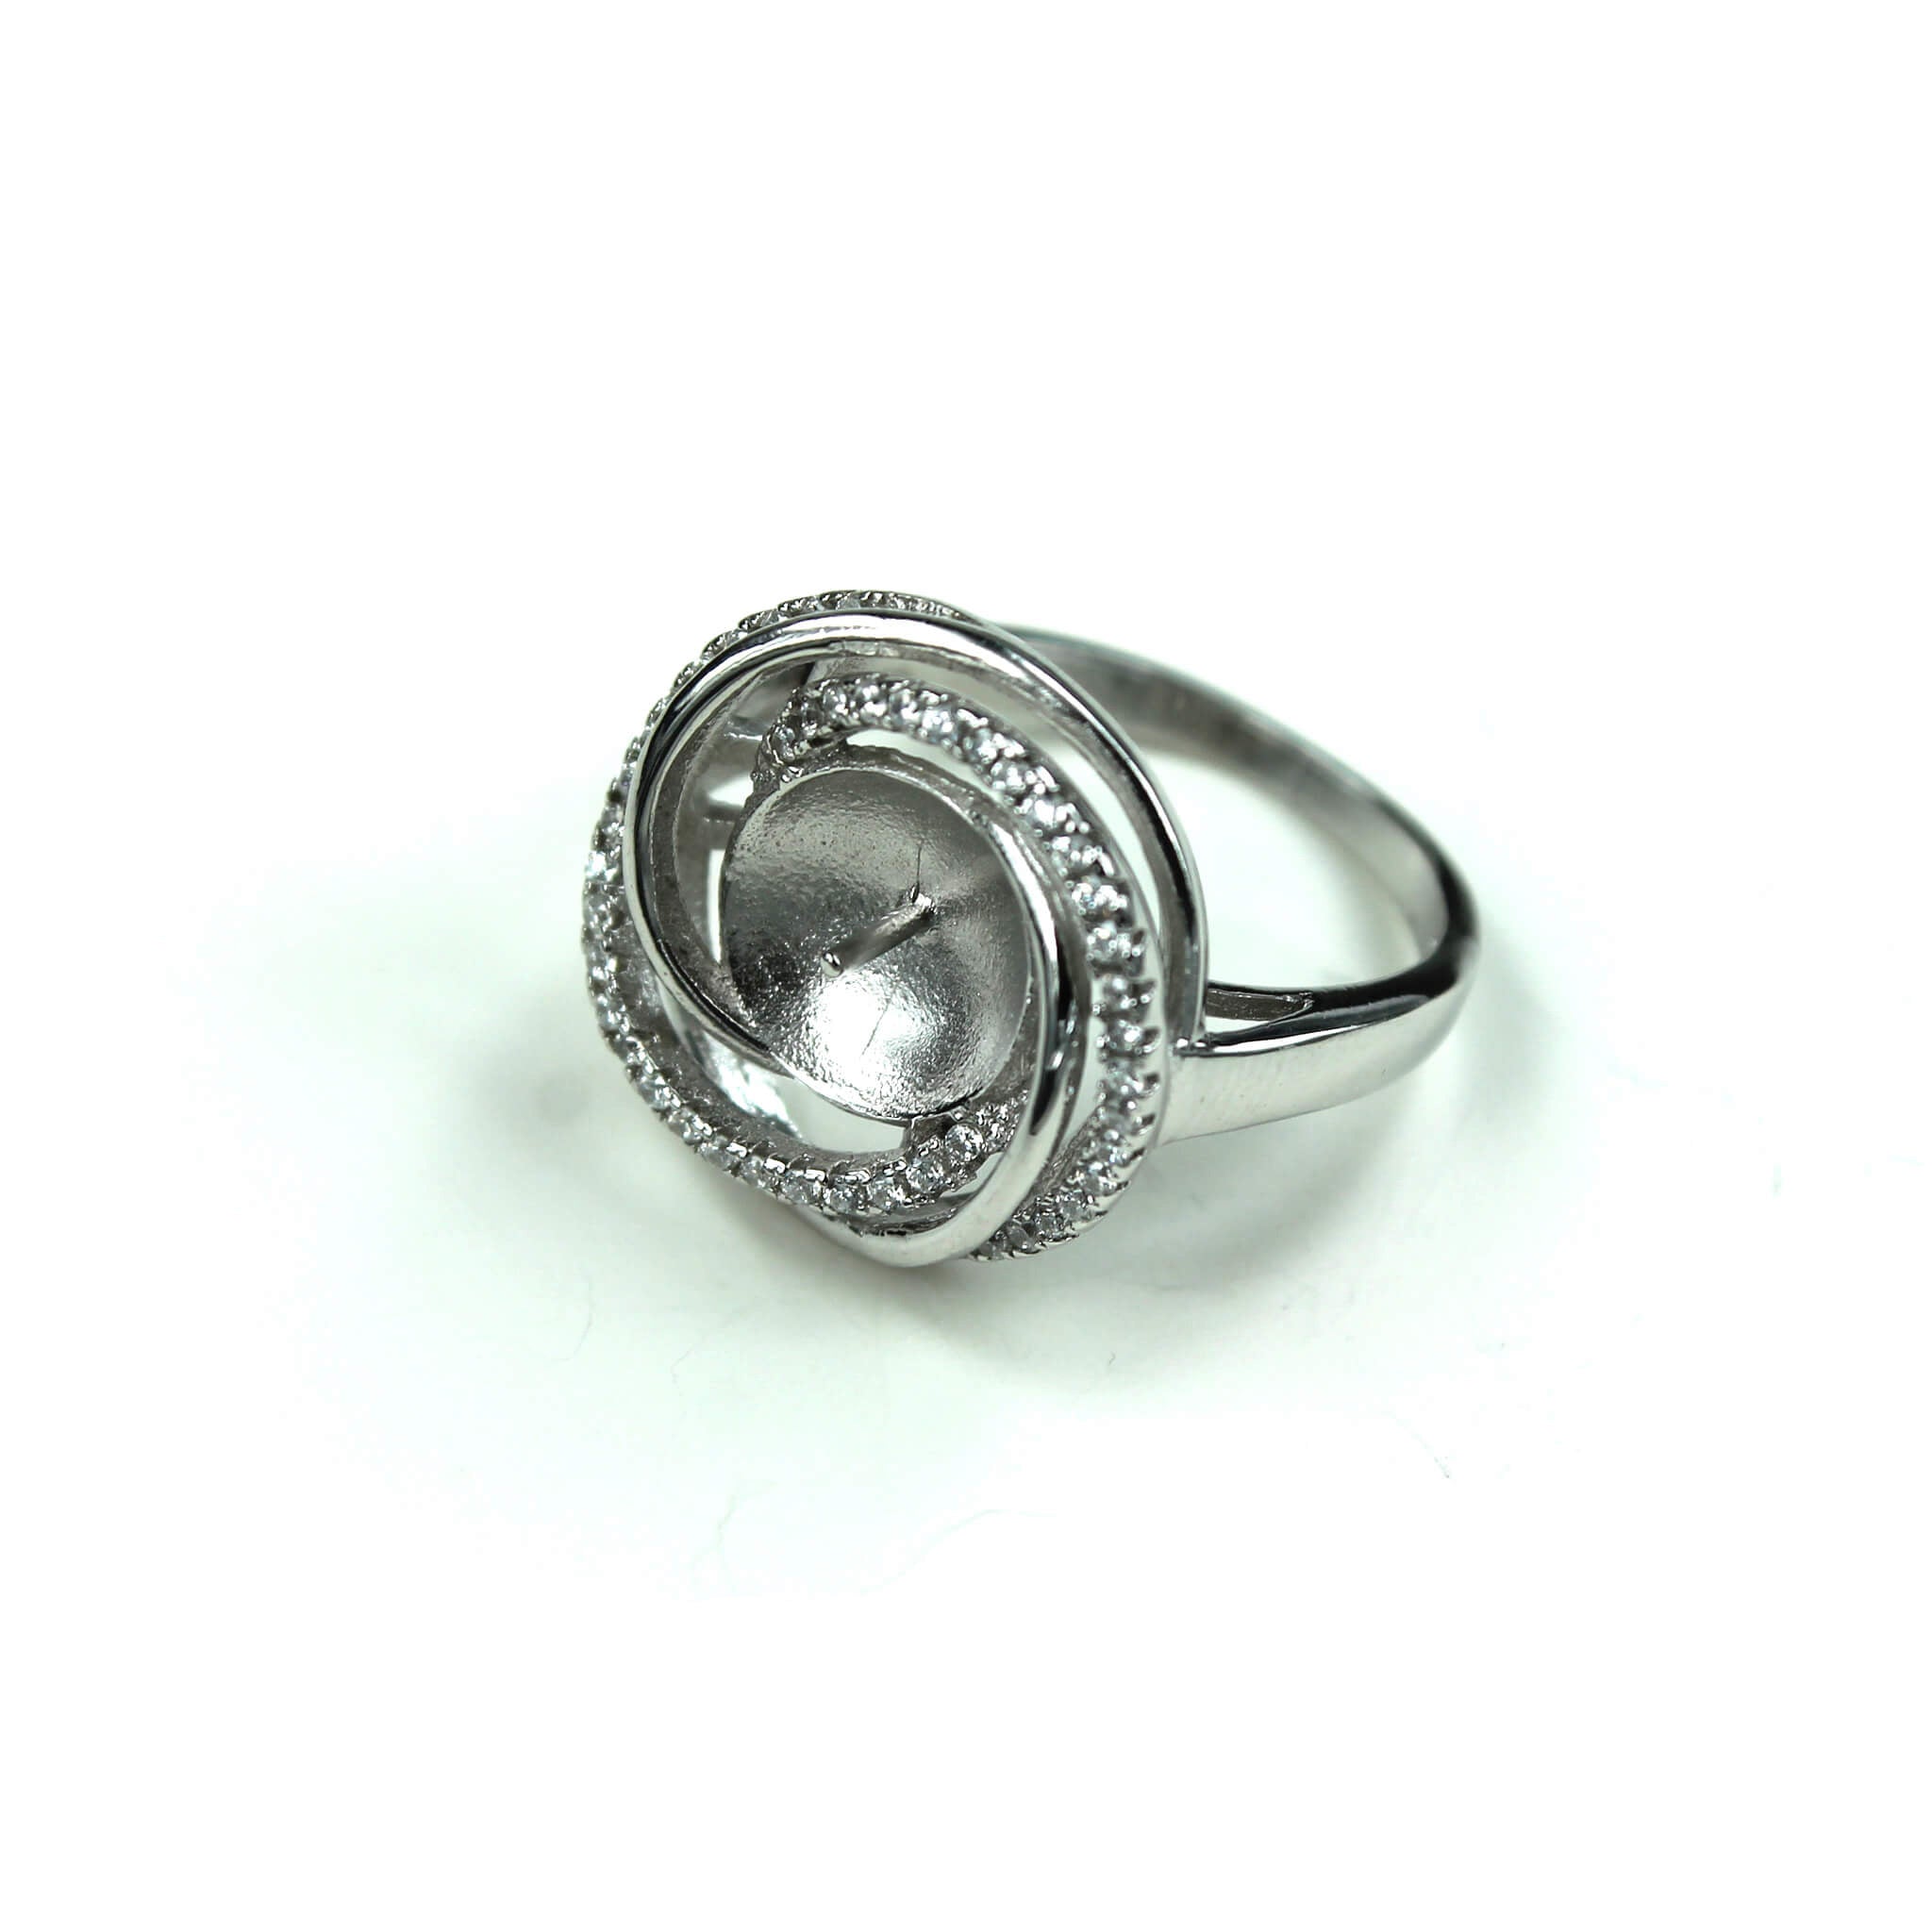 Swirl Ring with Cubic Zirconia Inlays and Cup and Peg Mounting in Sterling Silver 10mm